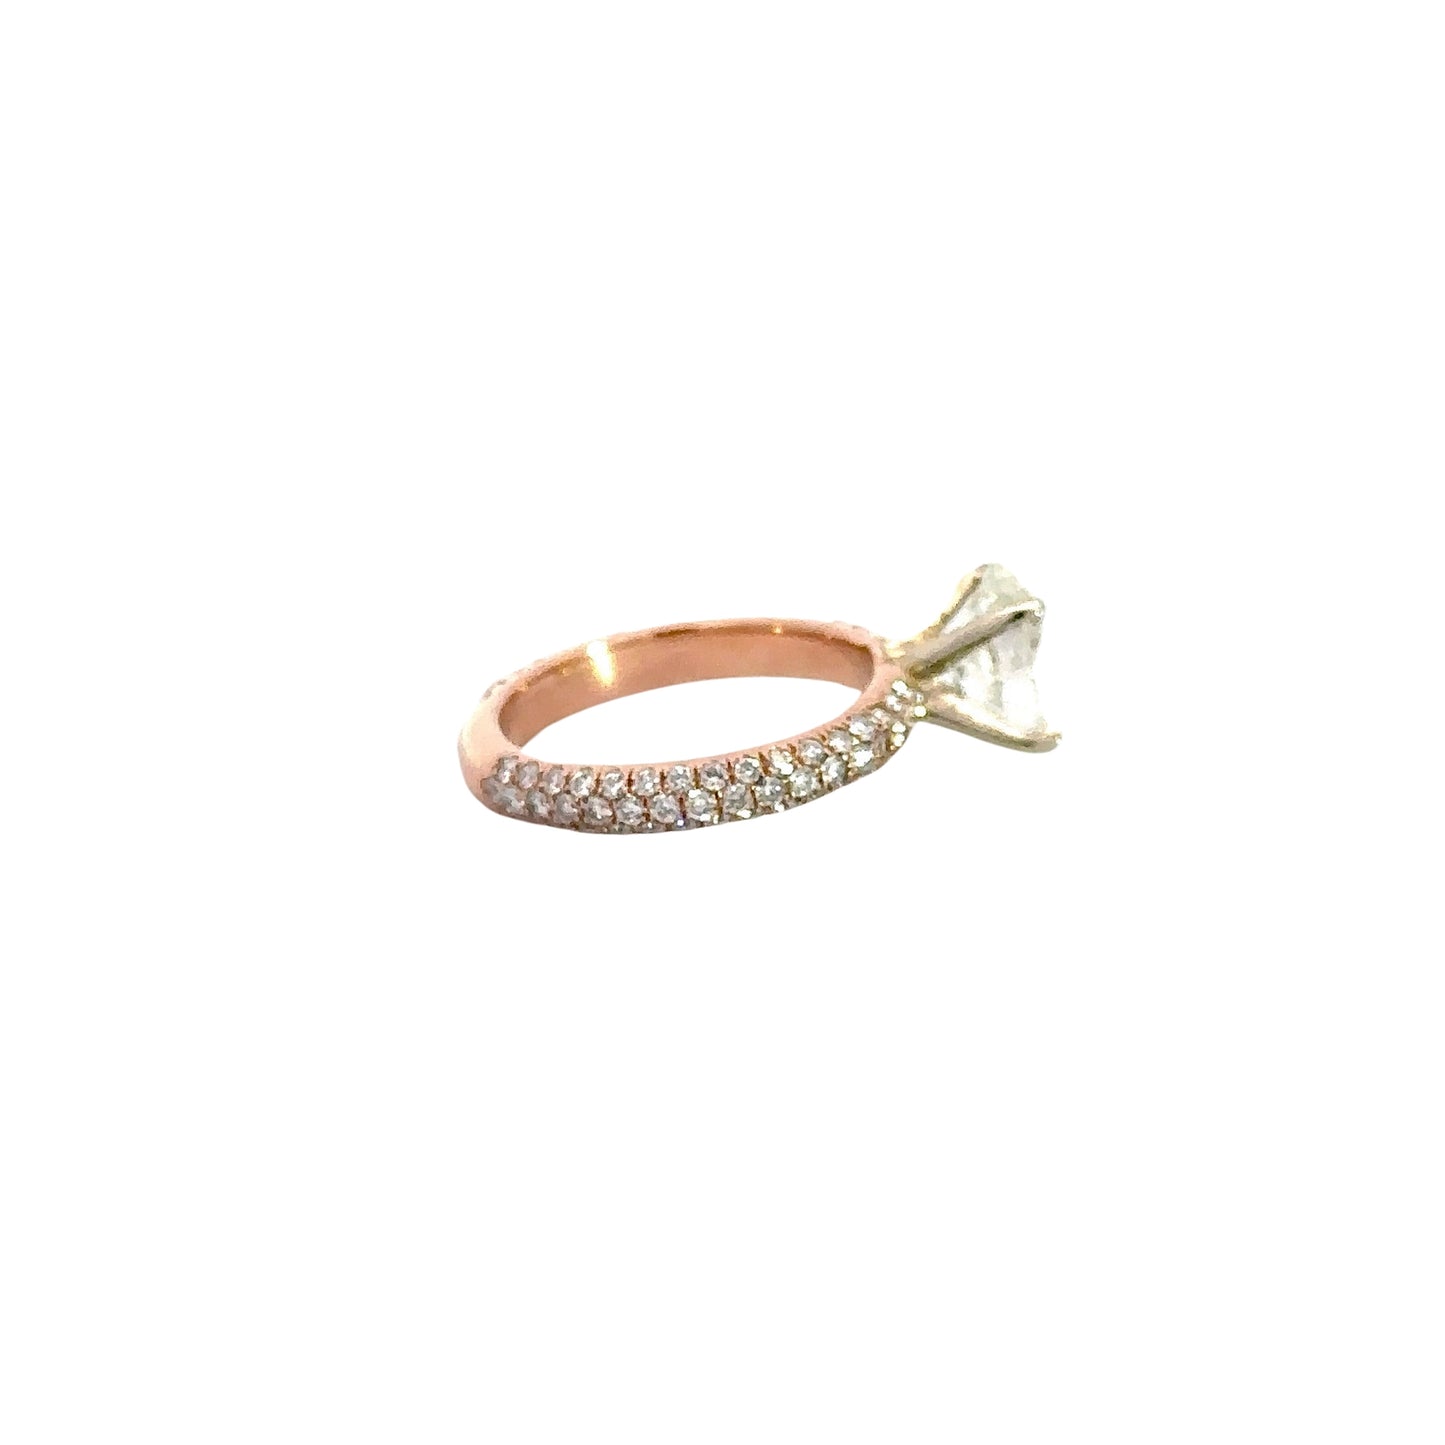 Side of rose gold ring with 3 rows of small round diamonds on the band